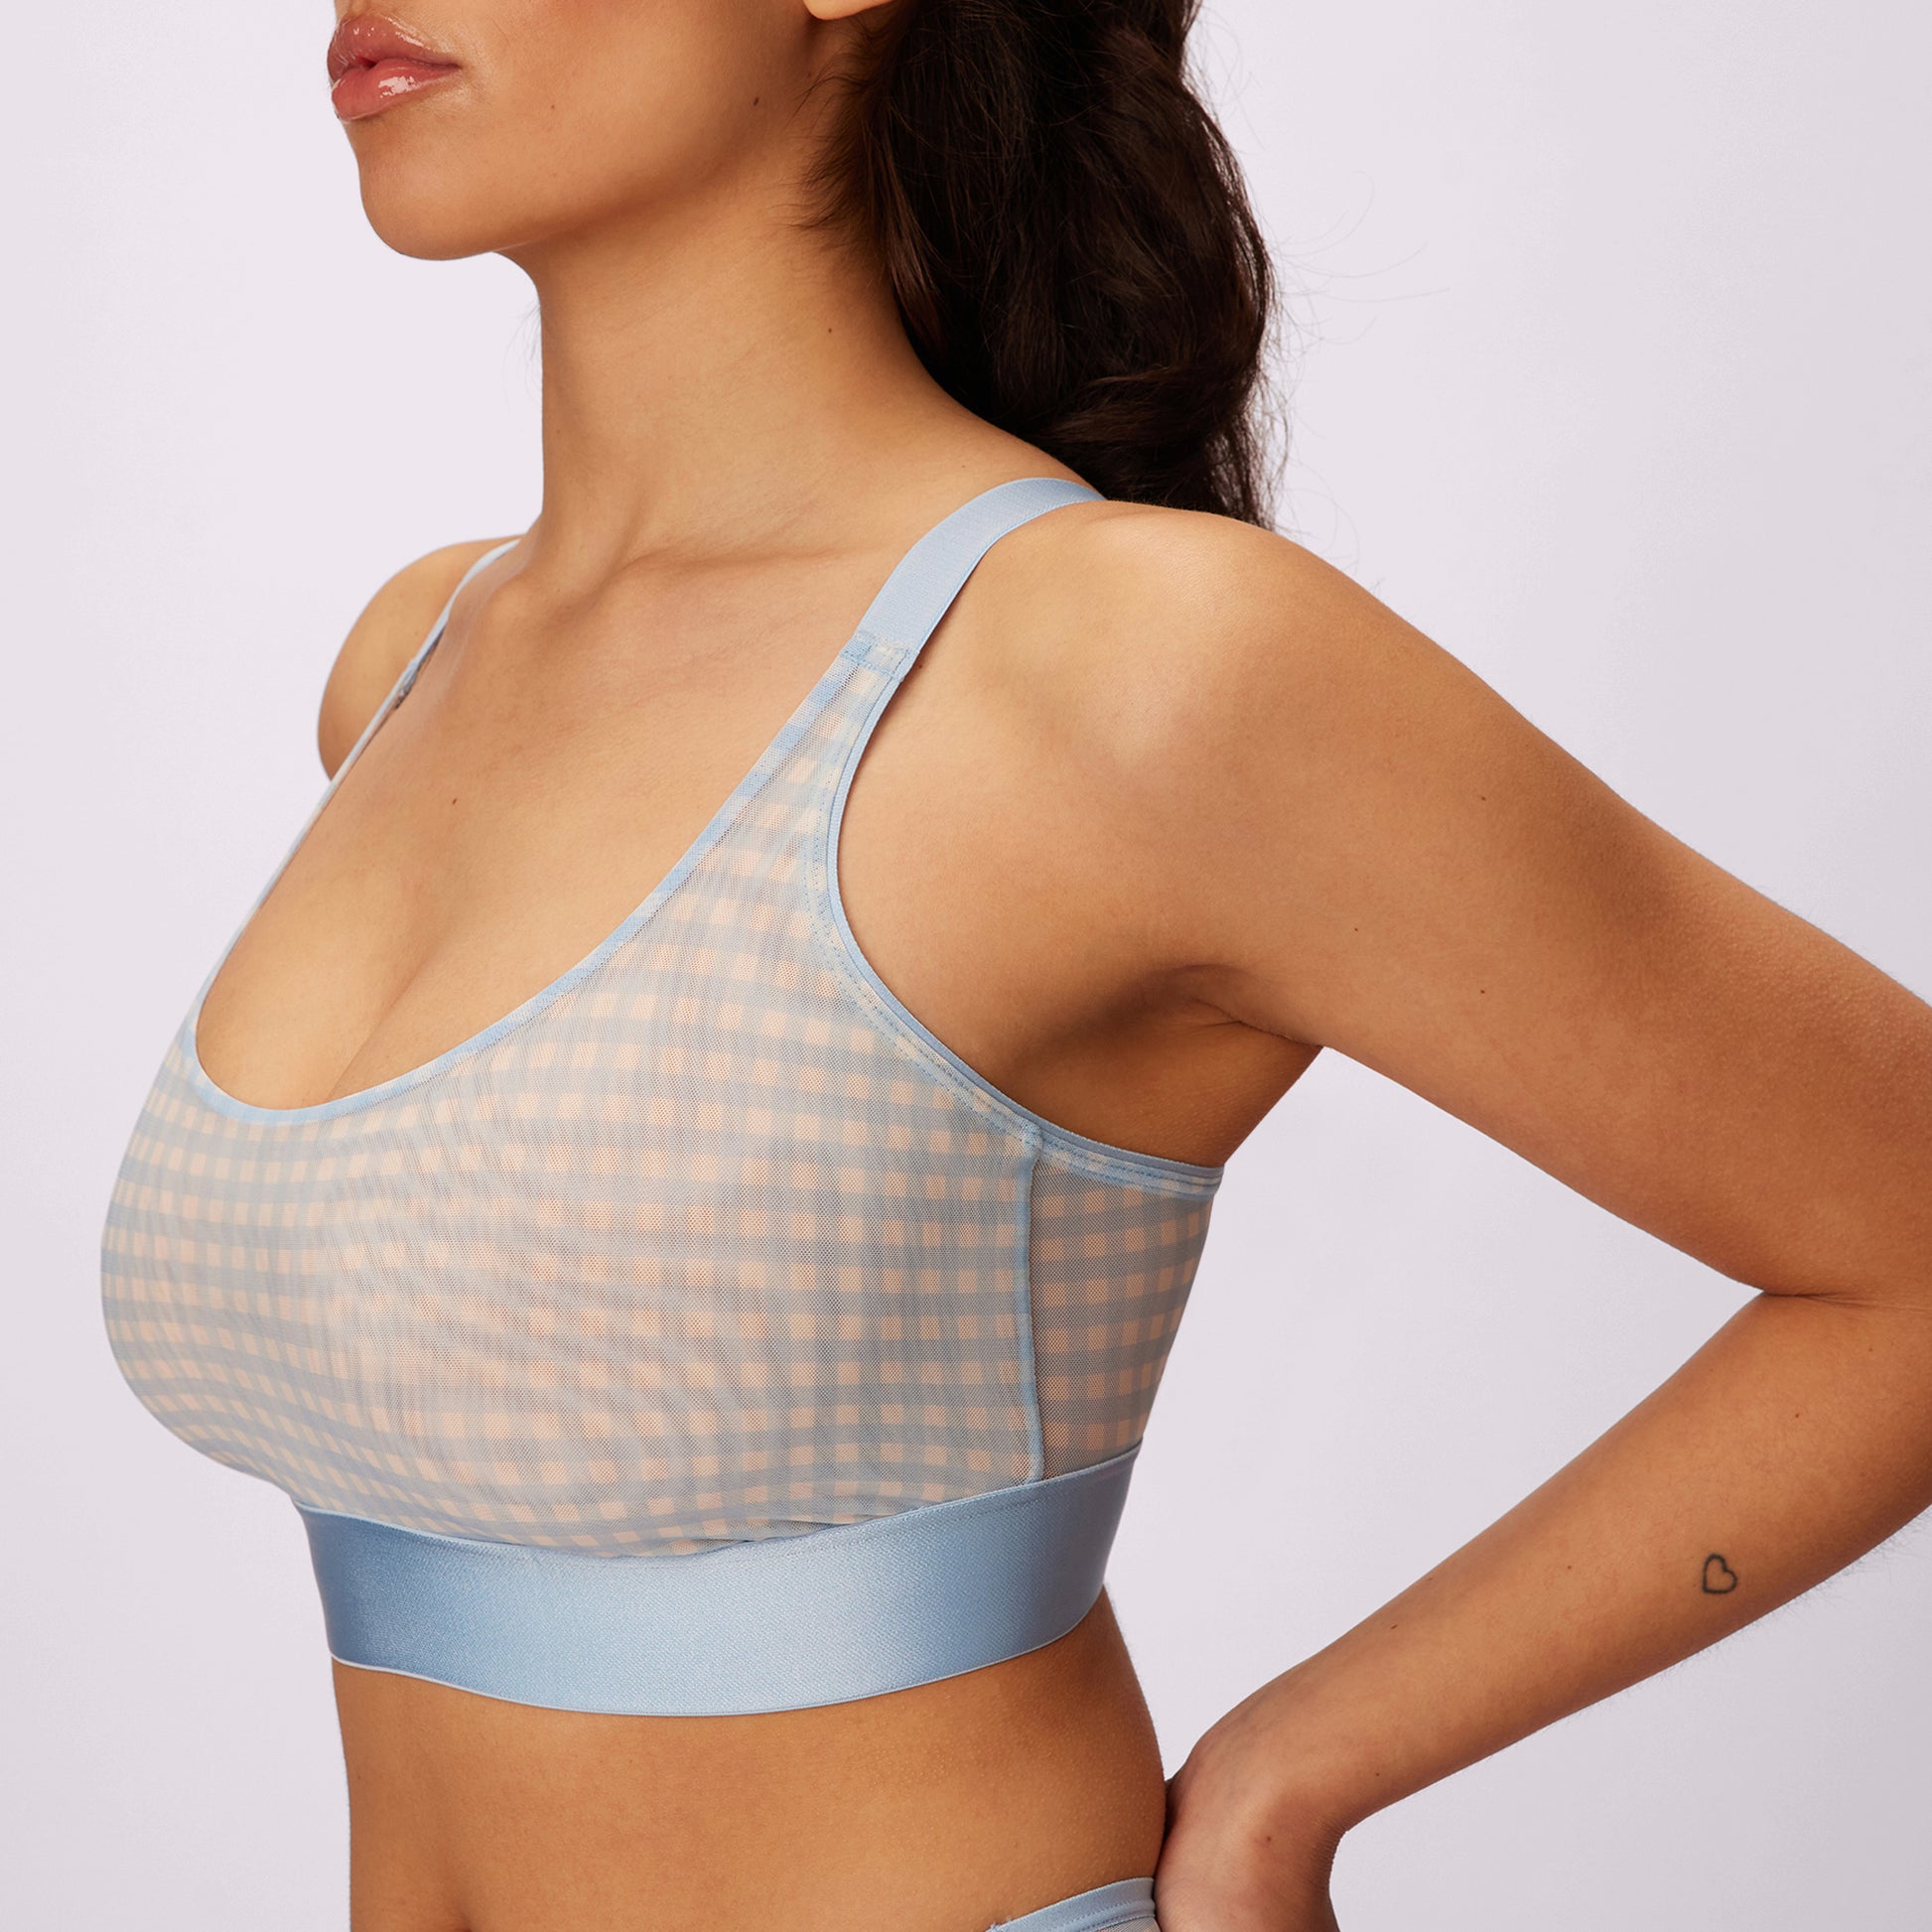 Buy the bi-stretch Italian mesh bra top with adjustable hooks and